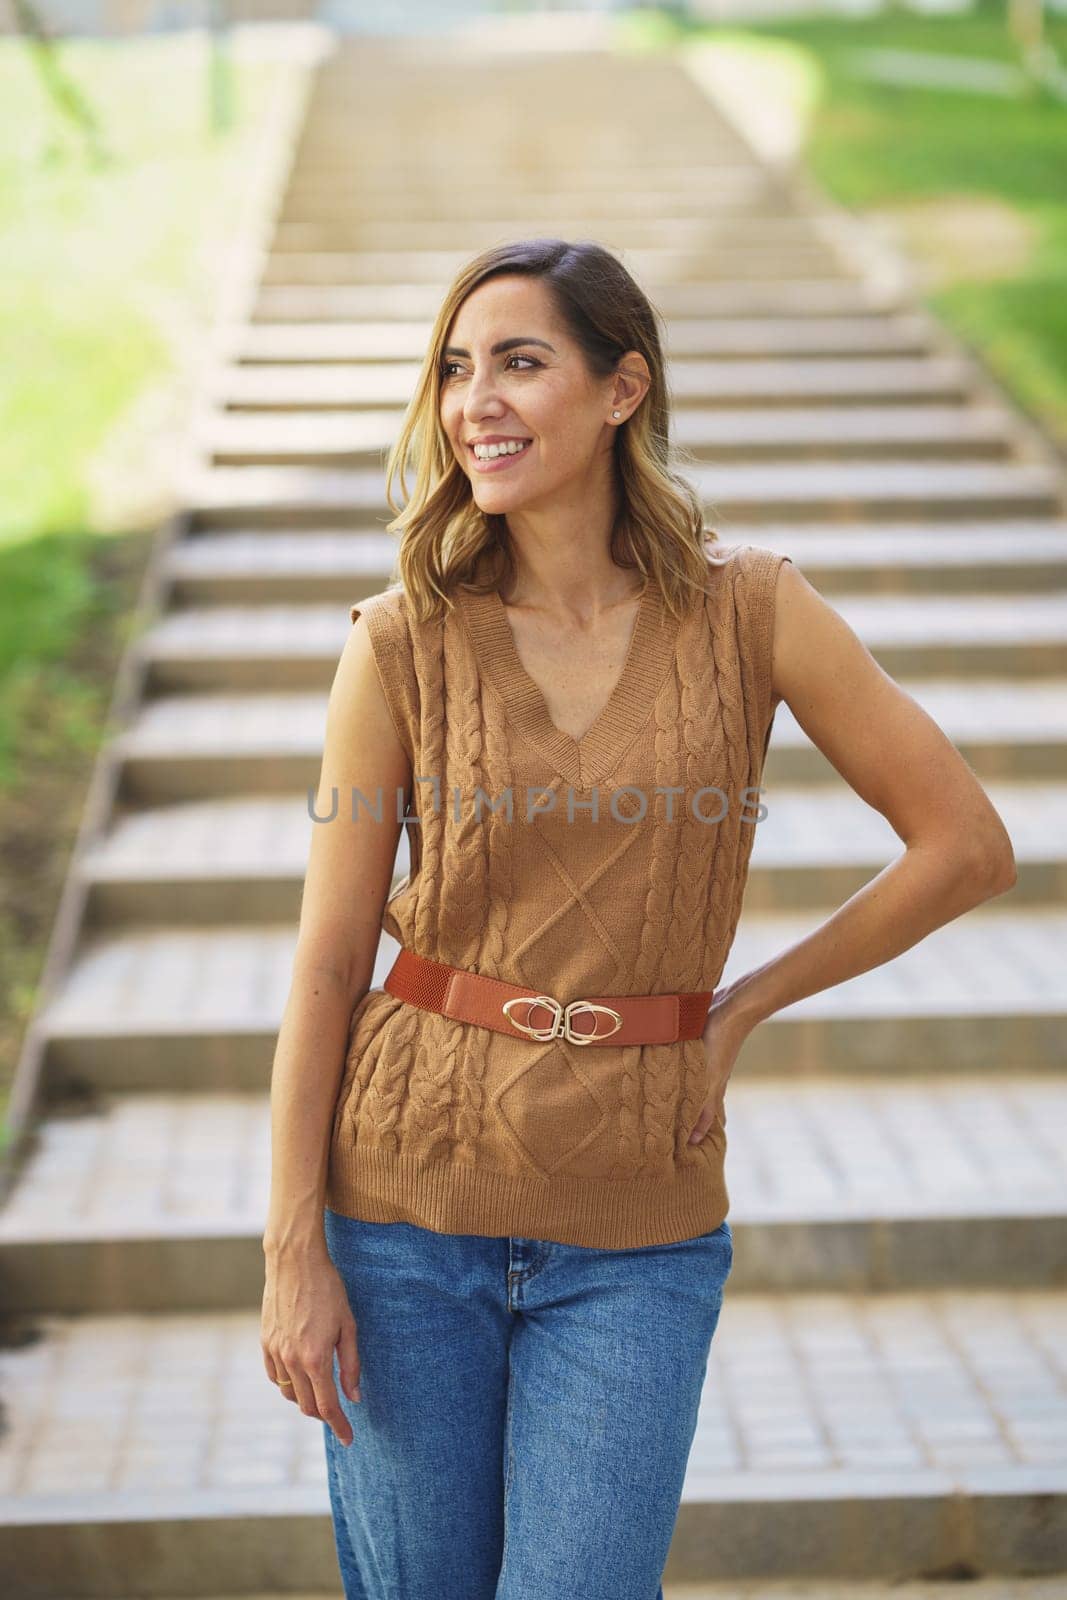 Glad woman standing near stairs by javiindy